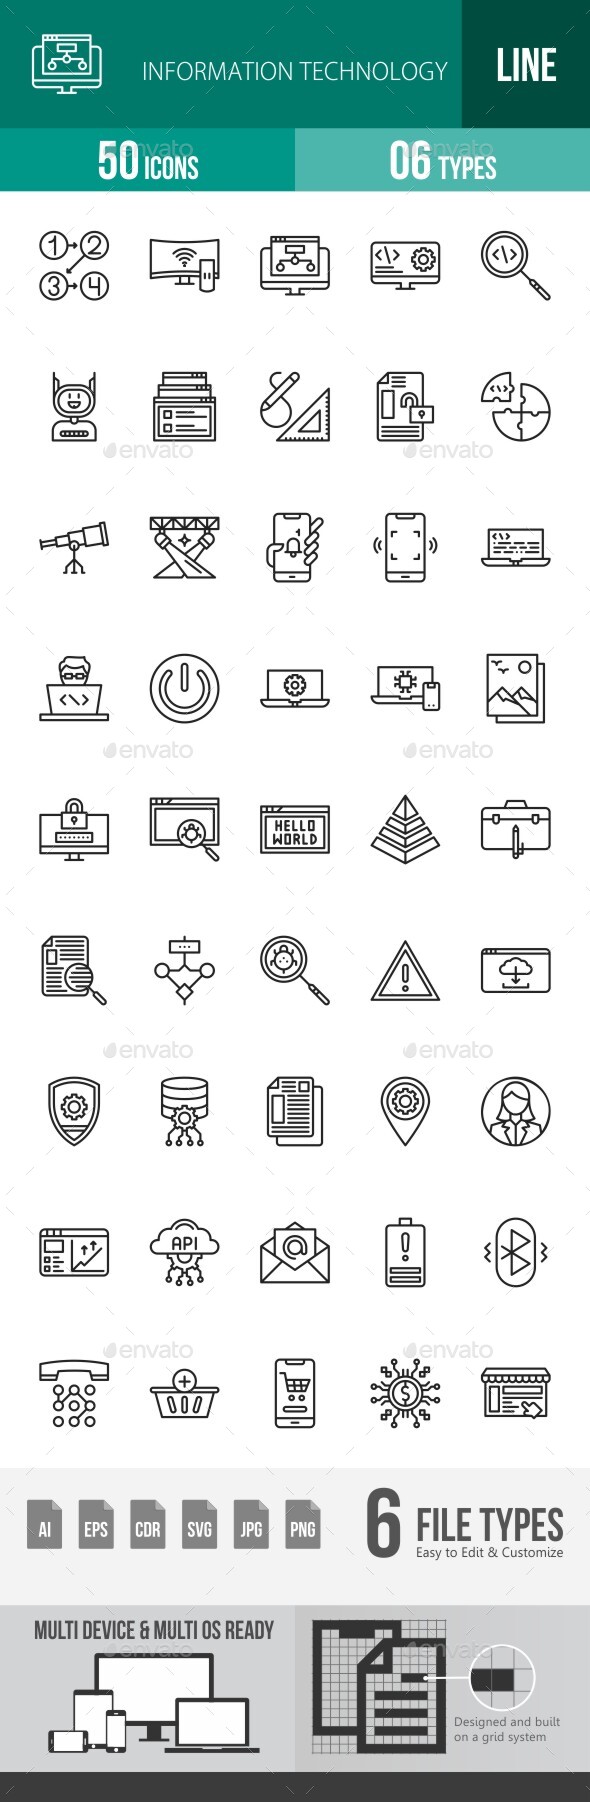 Information Technology Line Icons